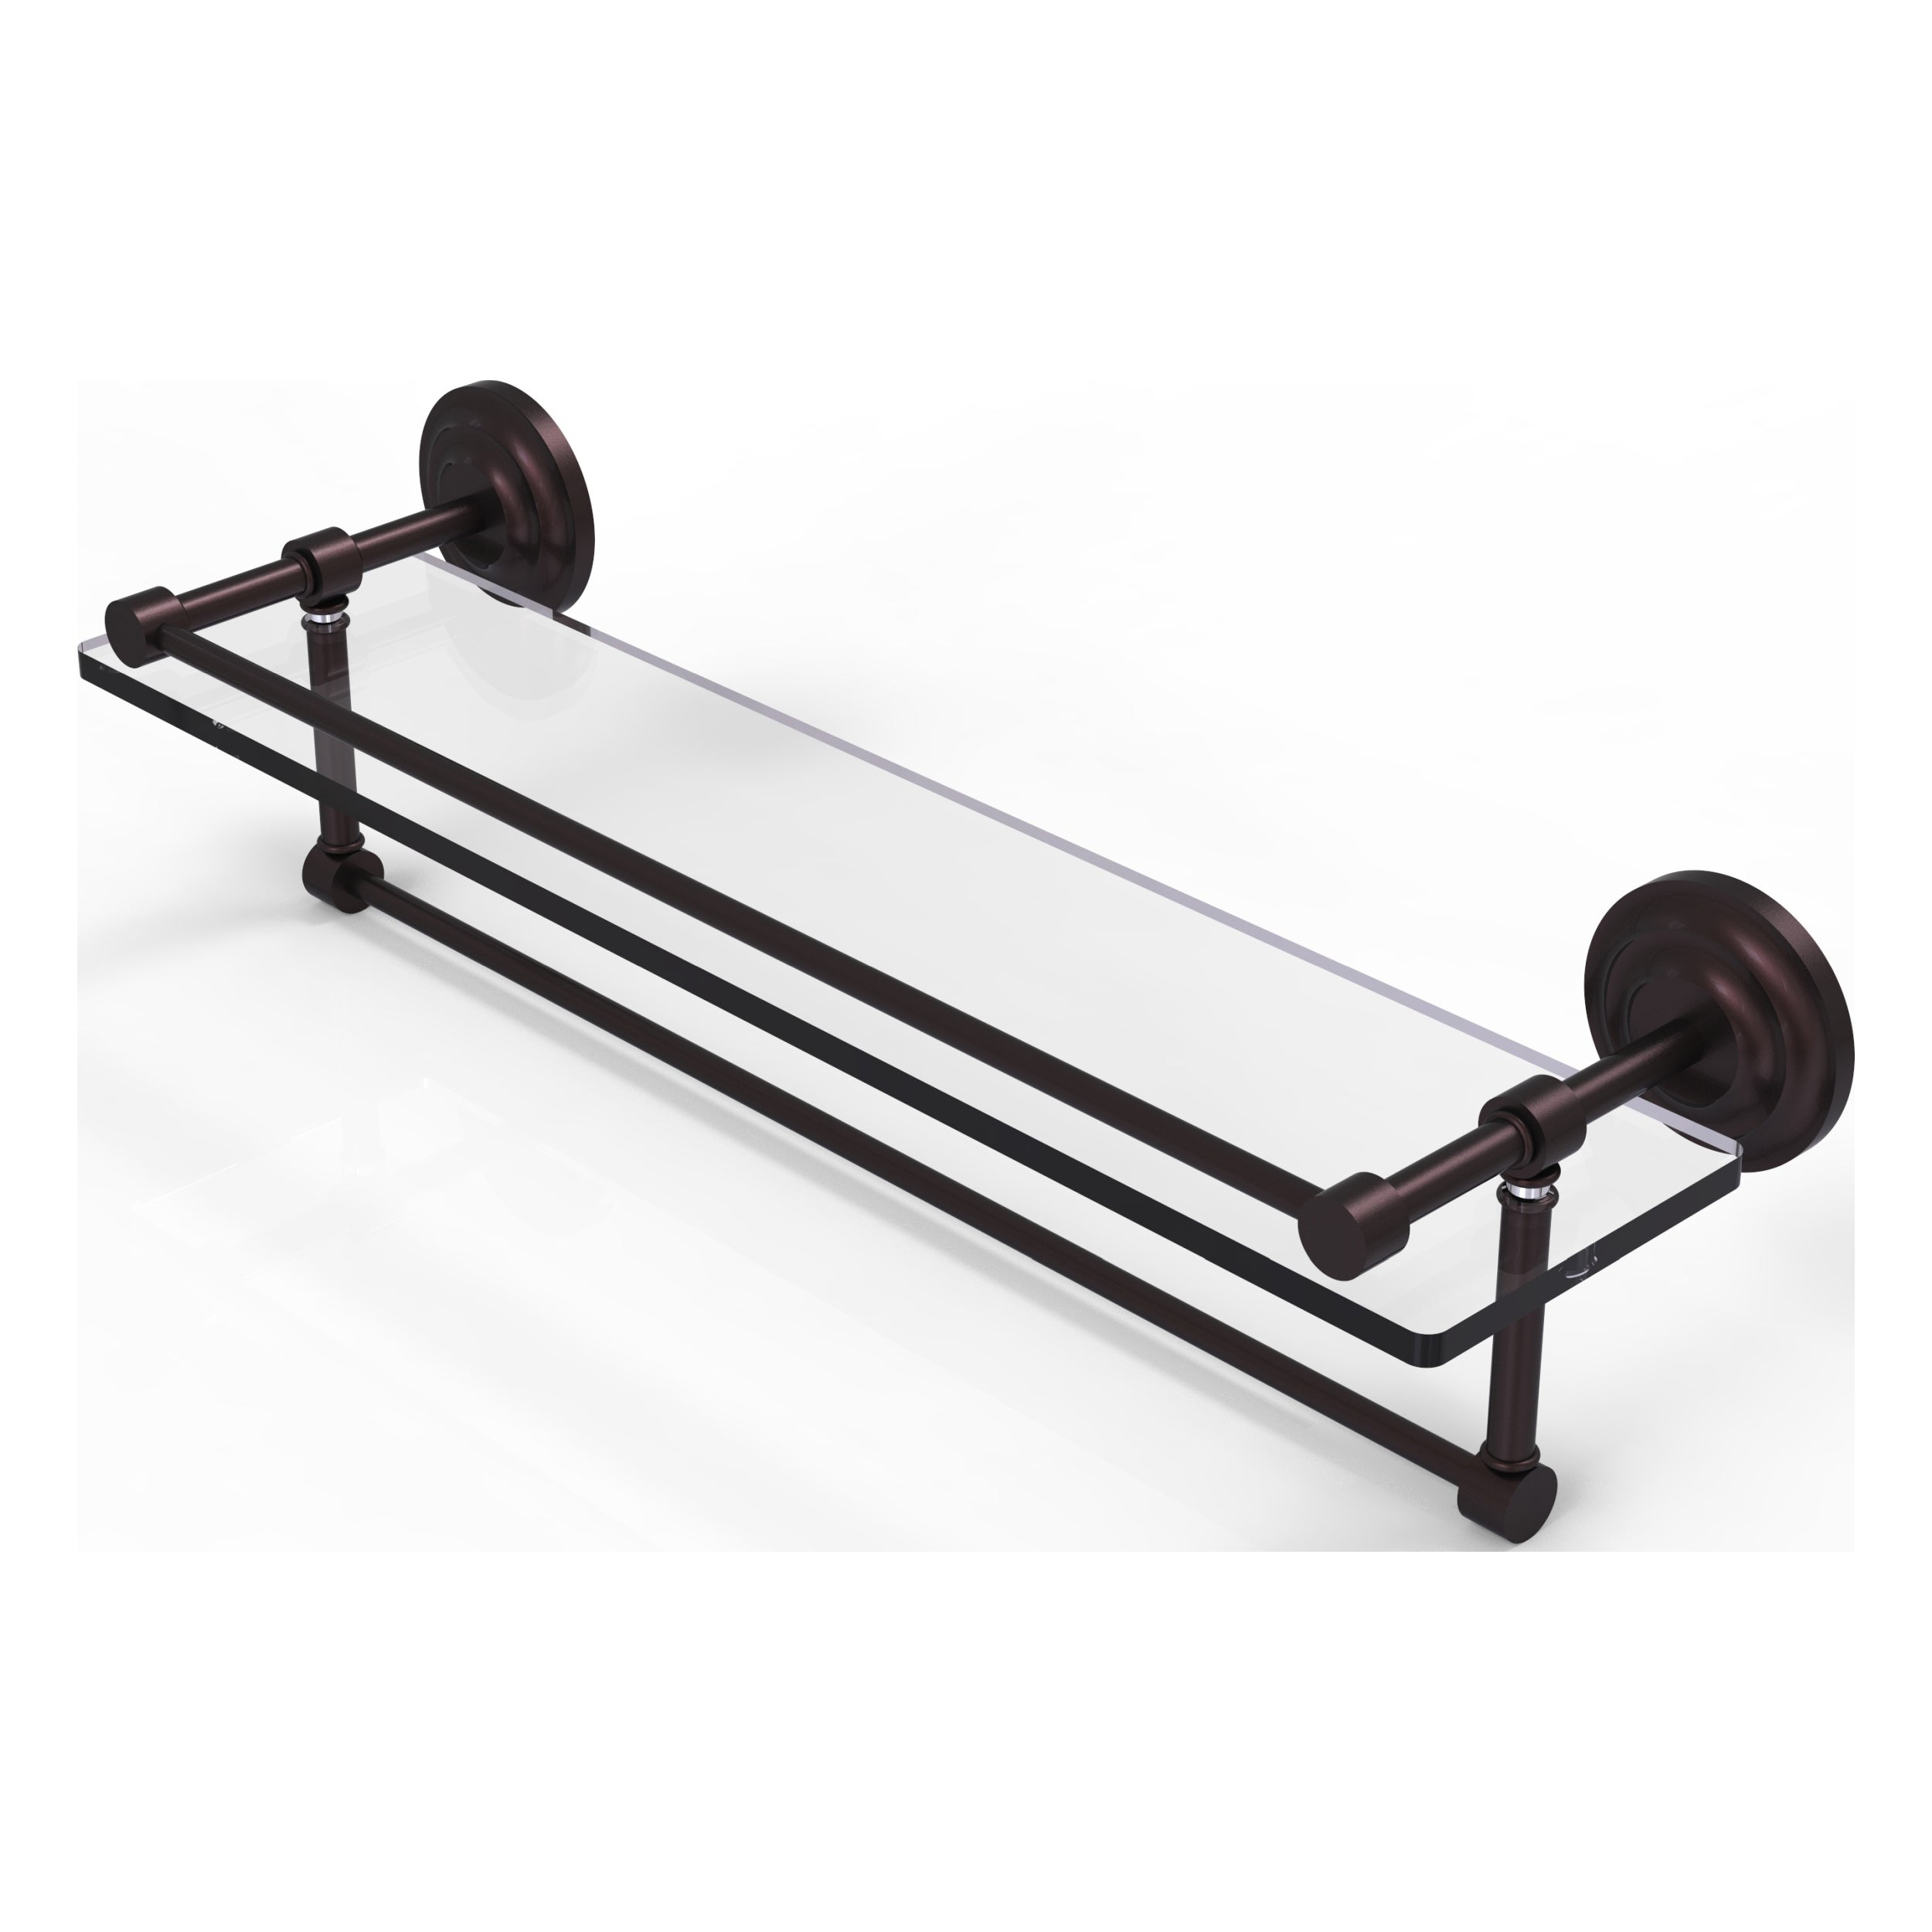 22-in Gallery Glass Shelf with Towel Bar in Antique Bronze - image 1 of 2